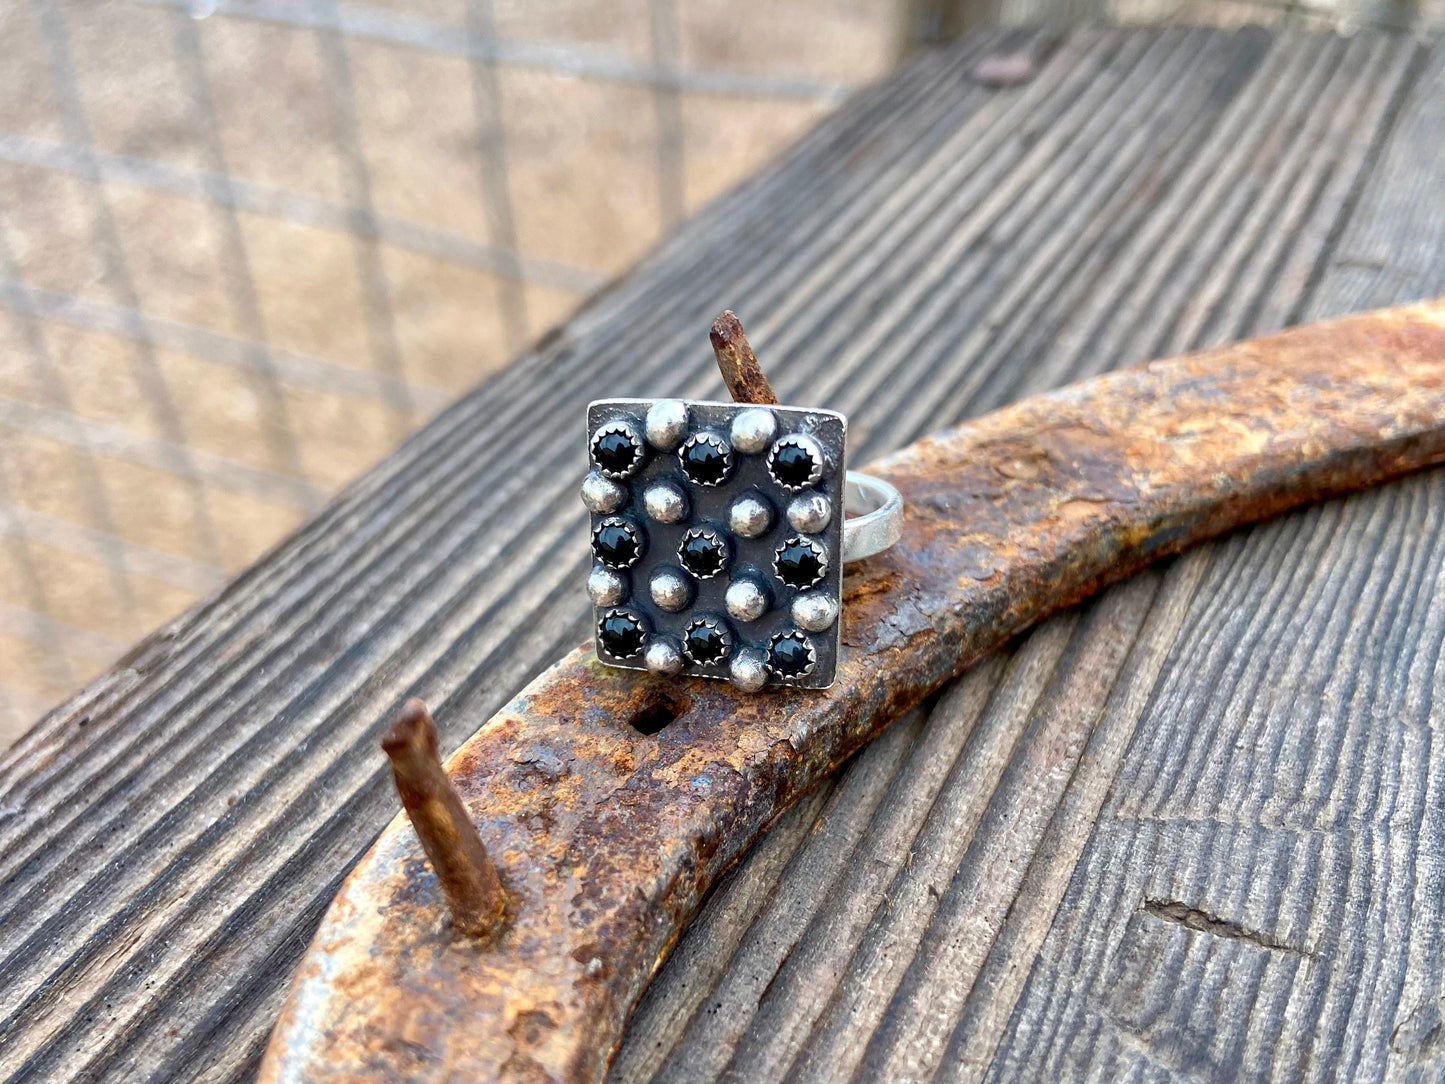 Eye Of The Spider Ring